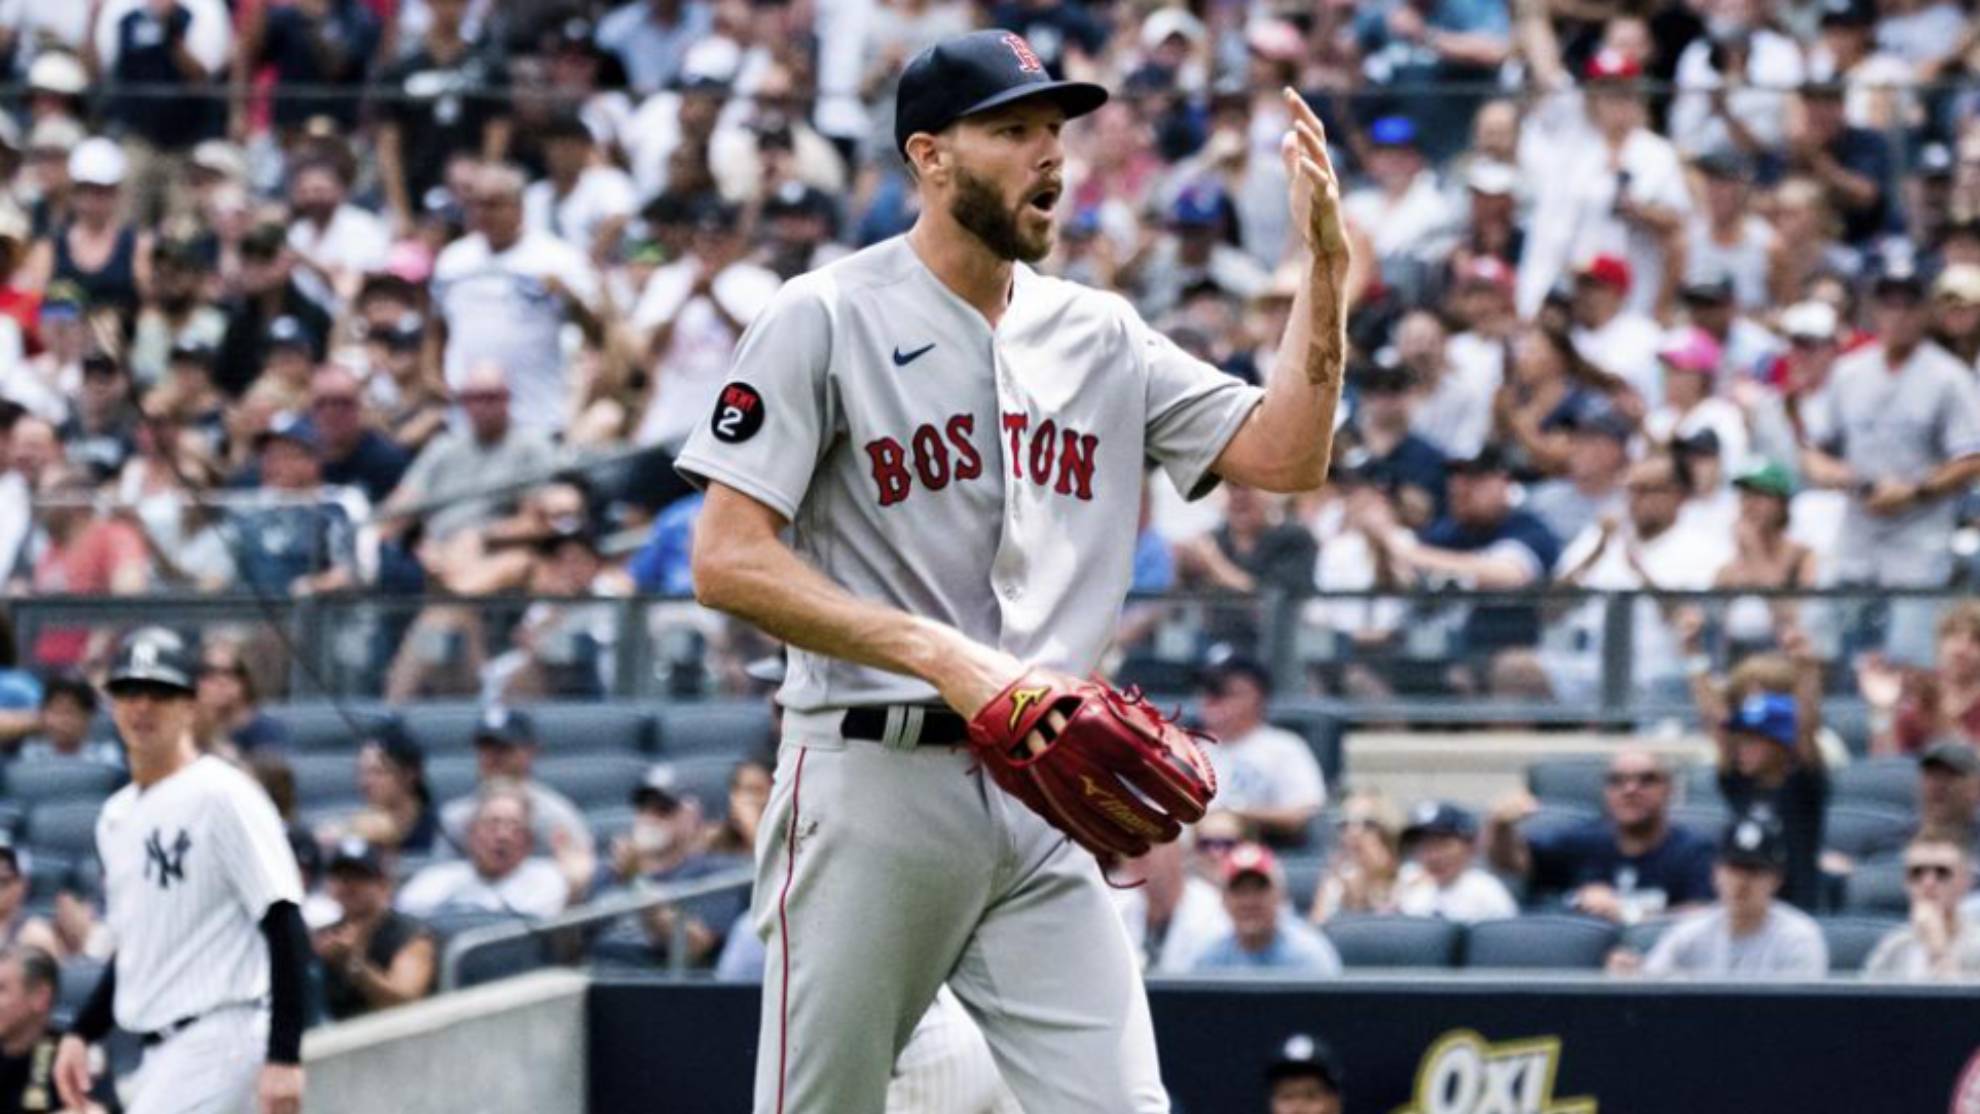 Chris Sale out for year after breaking wrist in bike accident